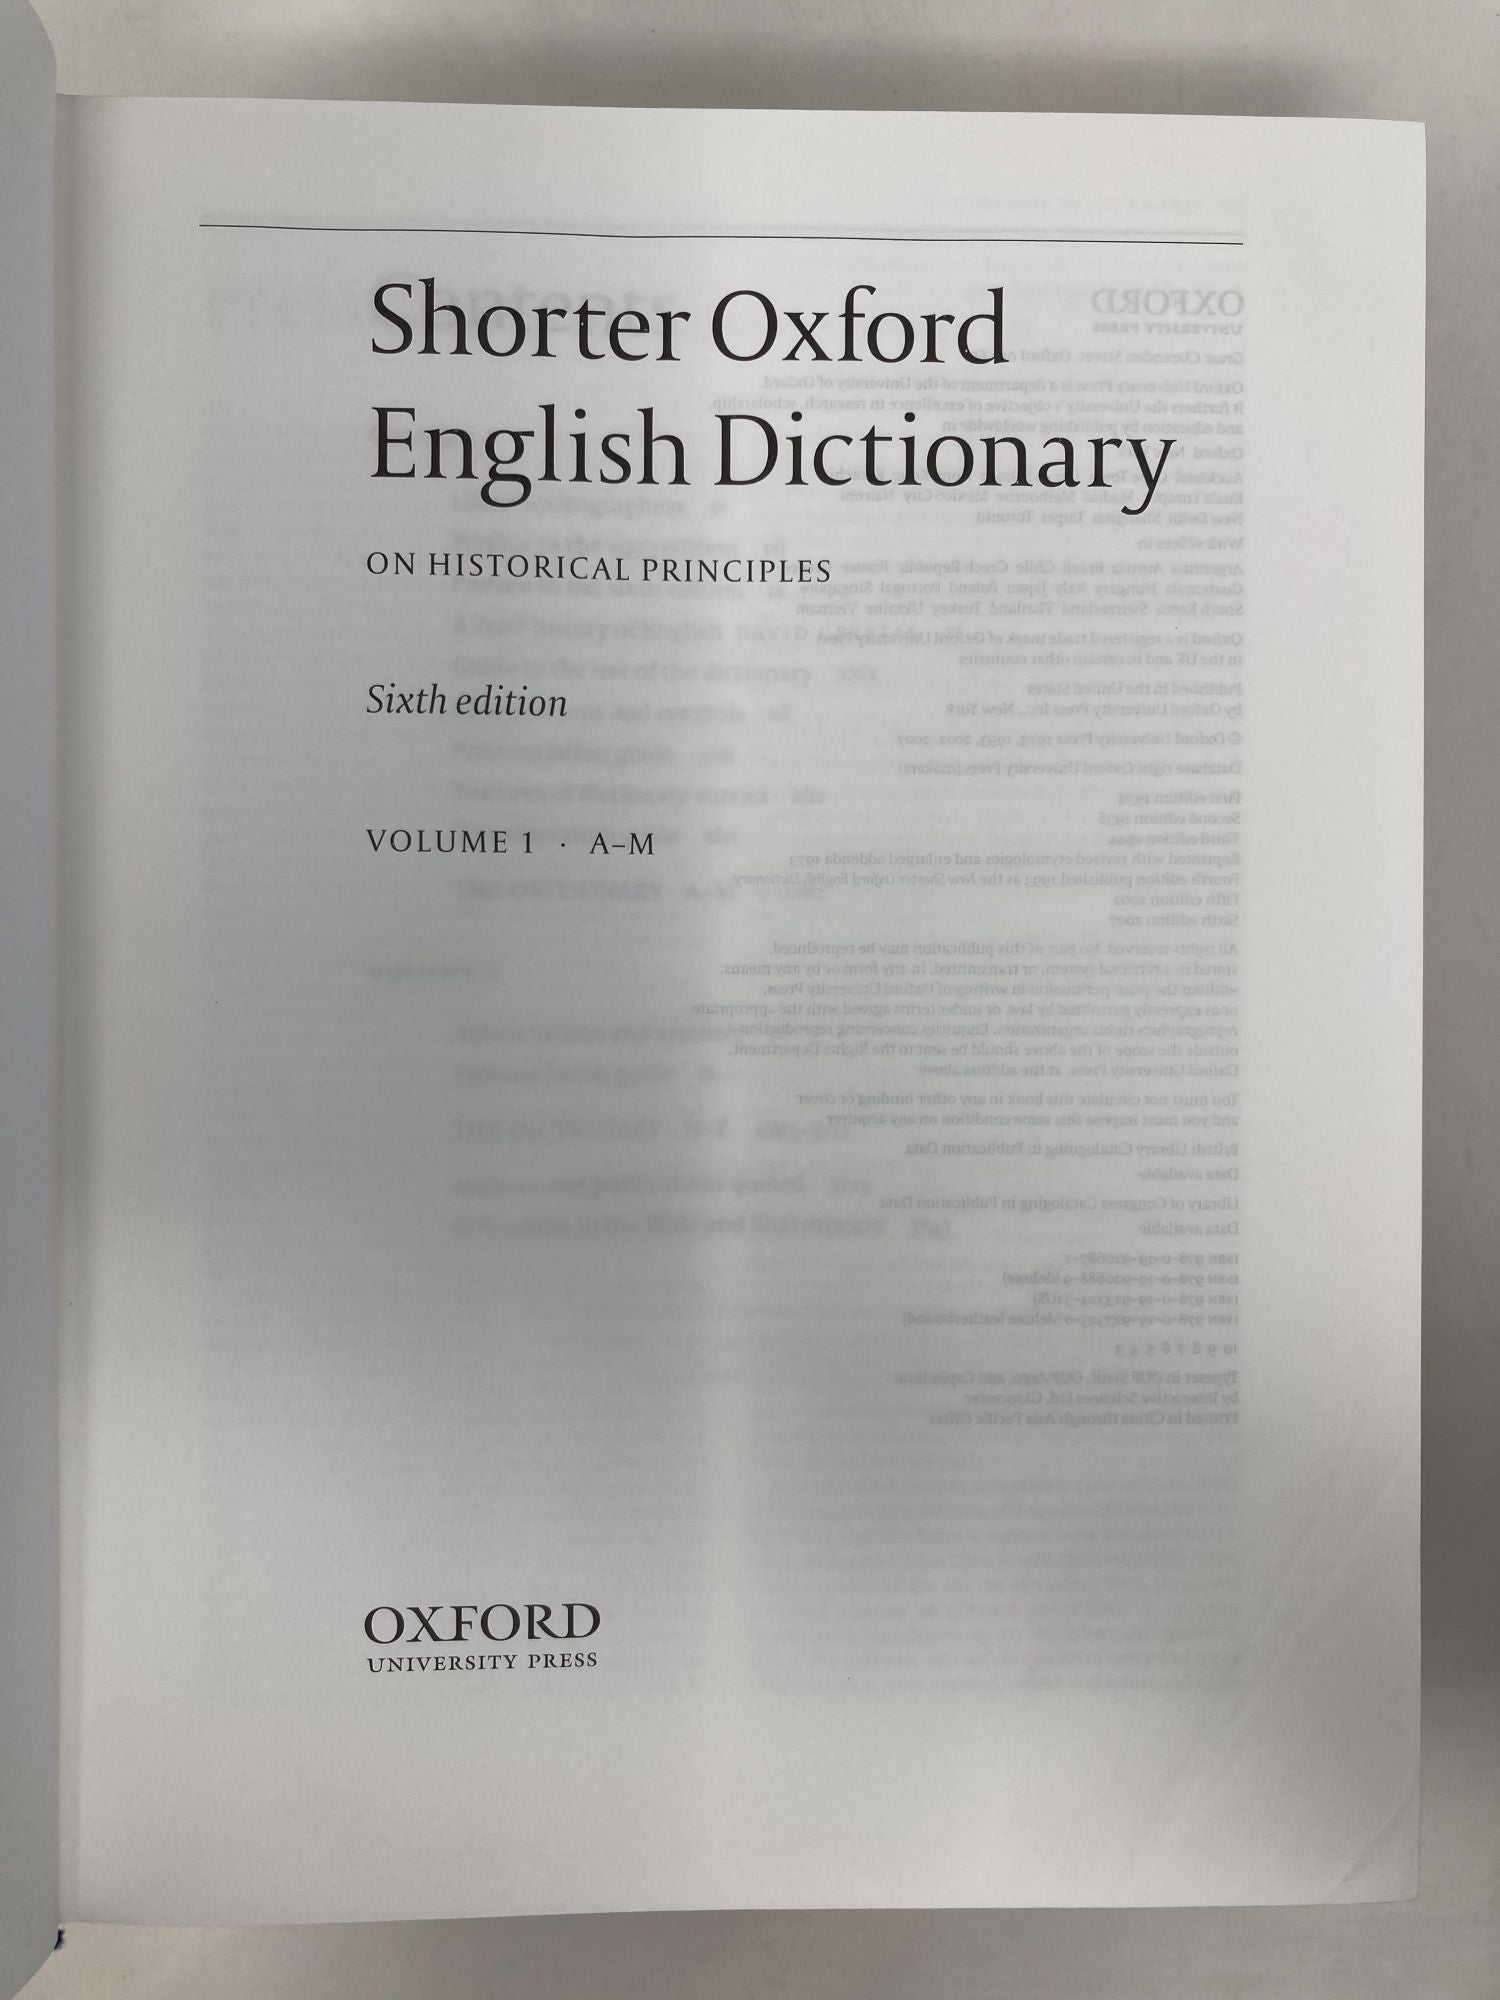 Shorter Oxford English Dictionary: Deluxe Sixth Edition by Oxford  Dictionaries on Sag Harbor Books